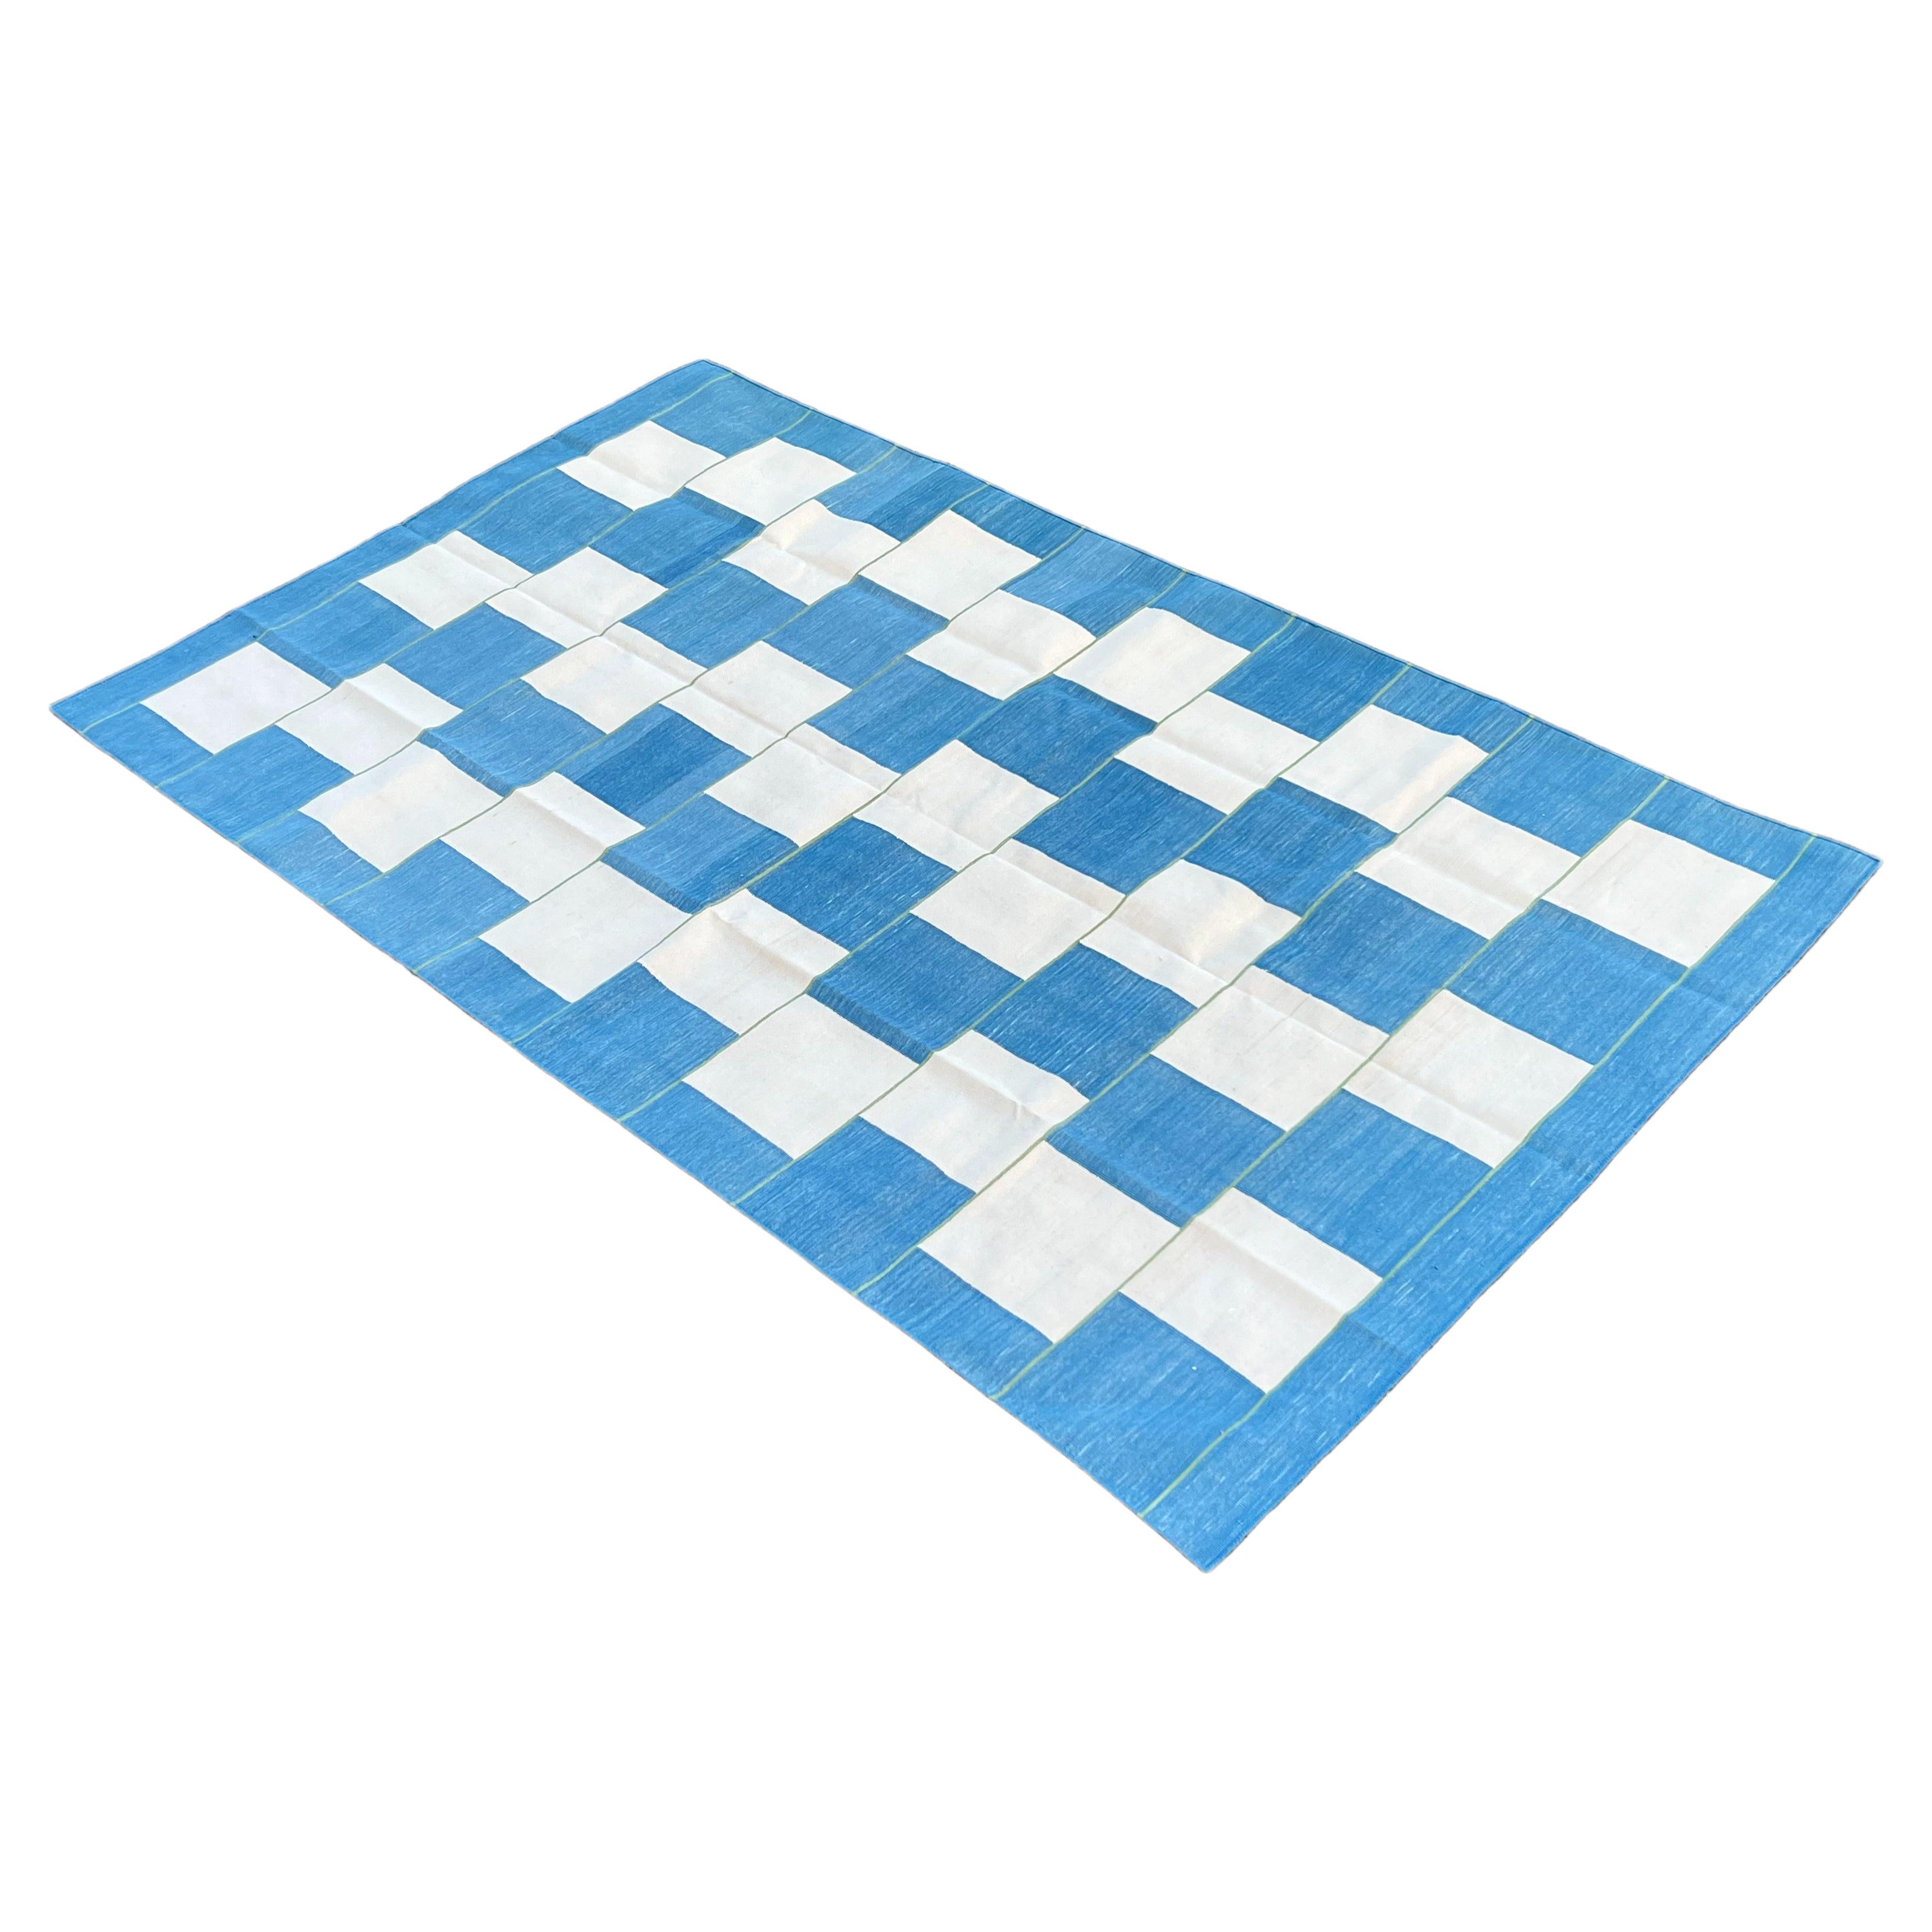 Handmade Cotton Area Flat Weave Rug, 5x8 Blue And White Checked Indian Dhurrie